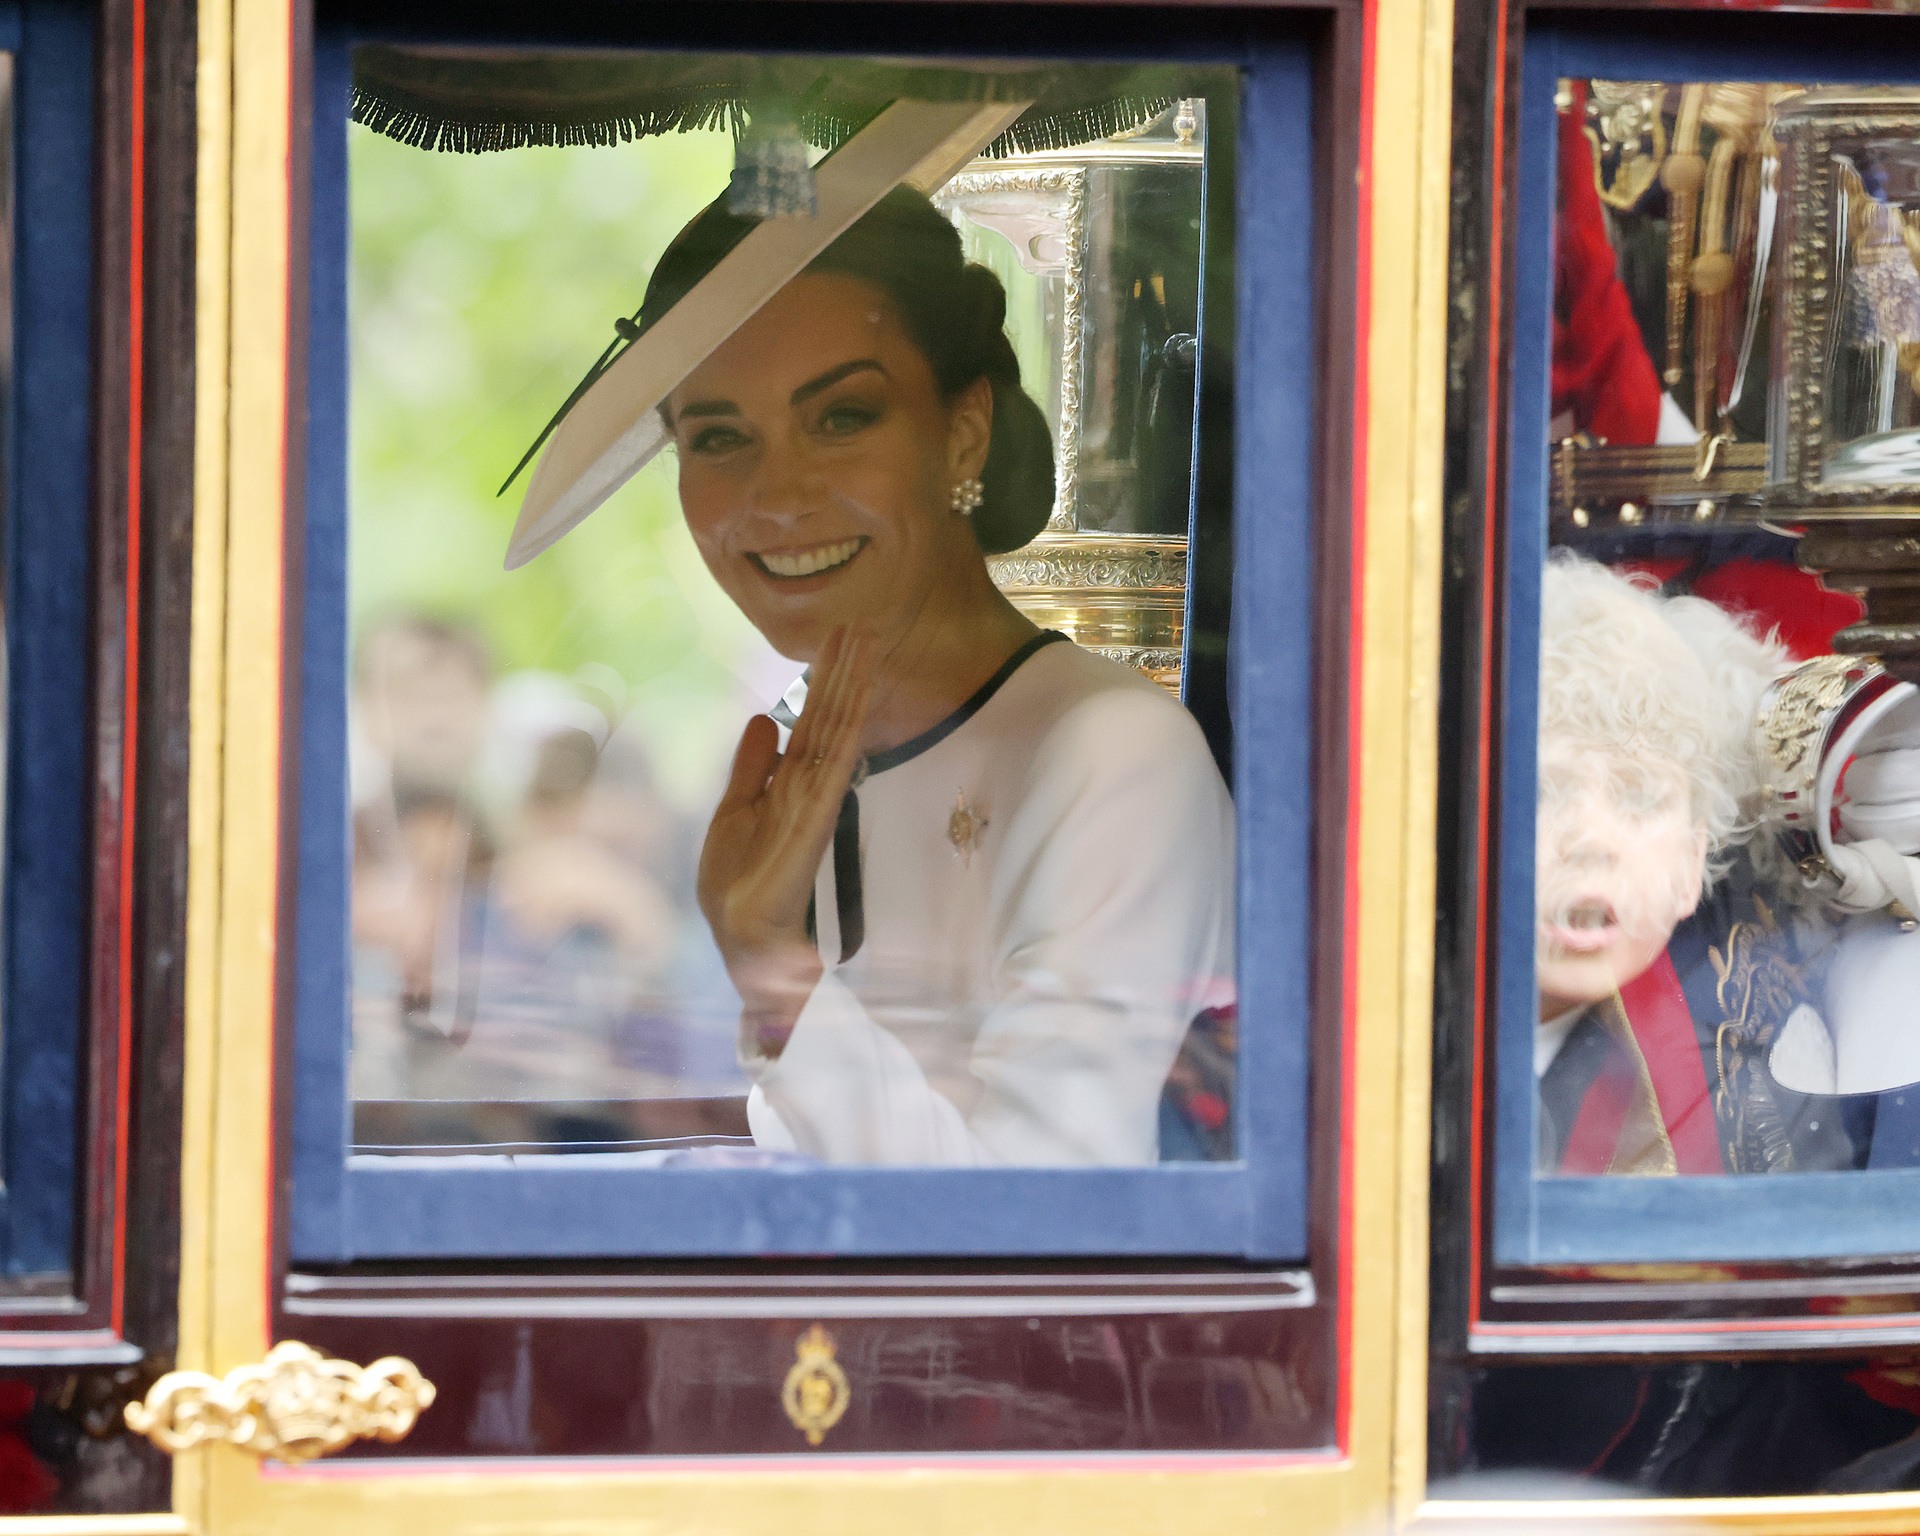 Catherine, Princess of Wales and Prince Louis of Wales during Trooping the Colour on June 15, 2024 in London, England. Trooping the Colour is a ceremonial parade celebrating the official birthday of the British Monarch. The event features over 1,400 soldiers and officers, accompanied by 200 horses. More than 400 musicians from ten different bands and Corps of Drums march and perform in perfect harmony. (Photo by Neil Mockford/GC Images)